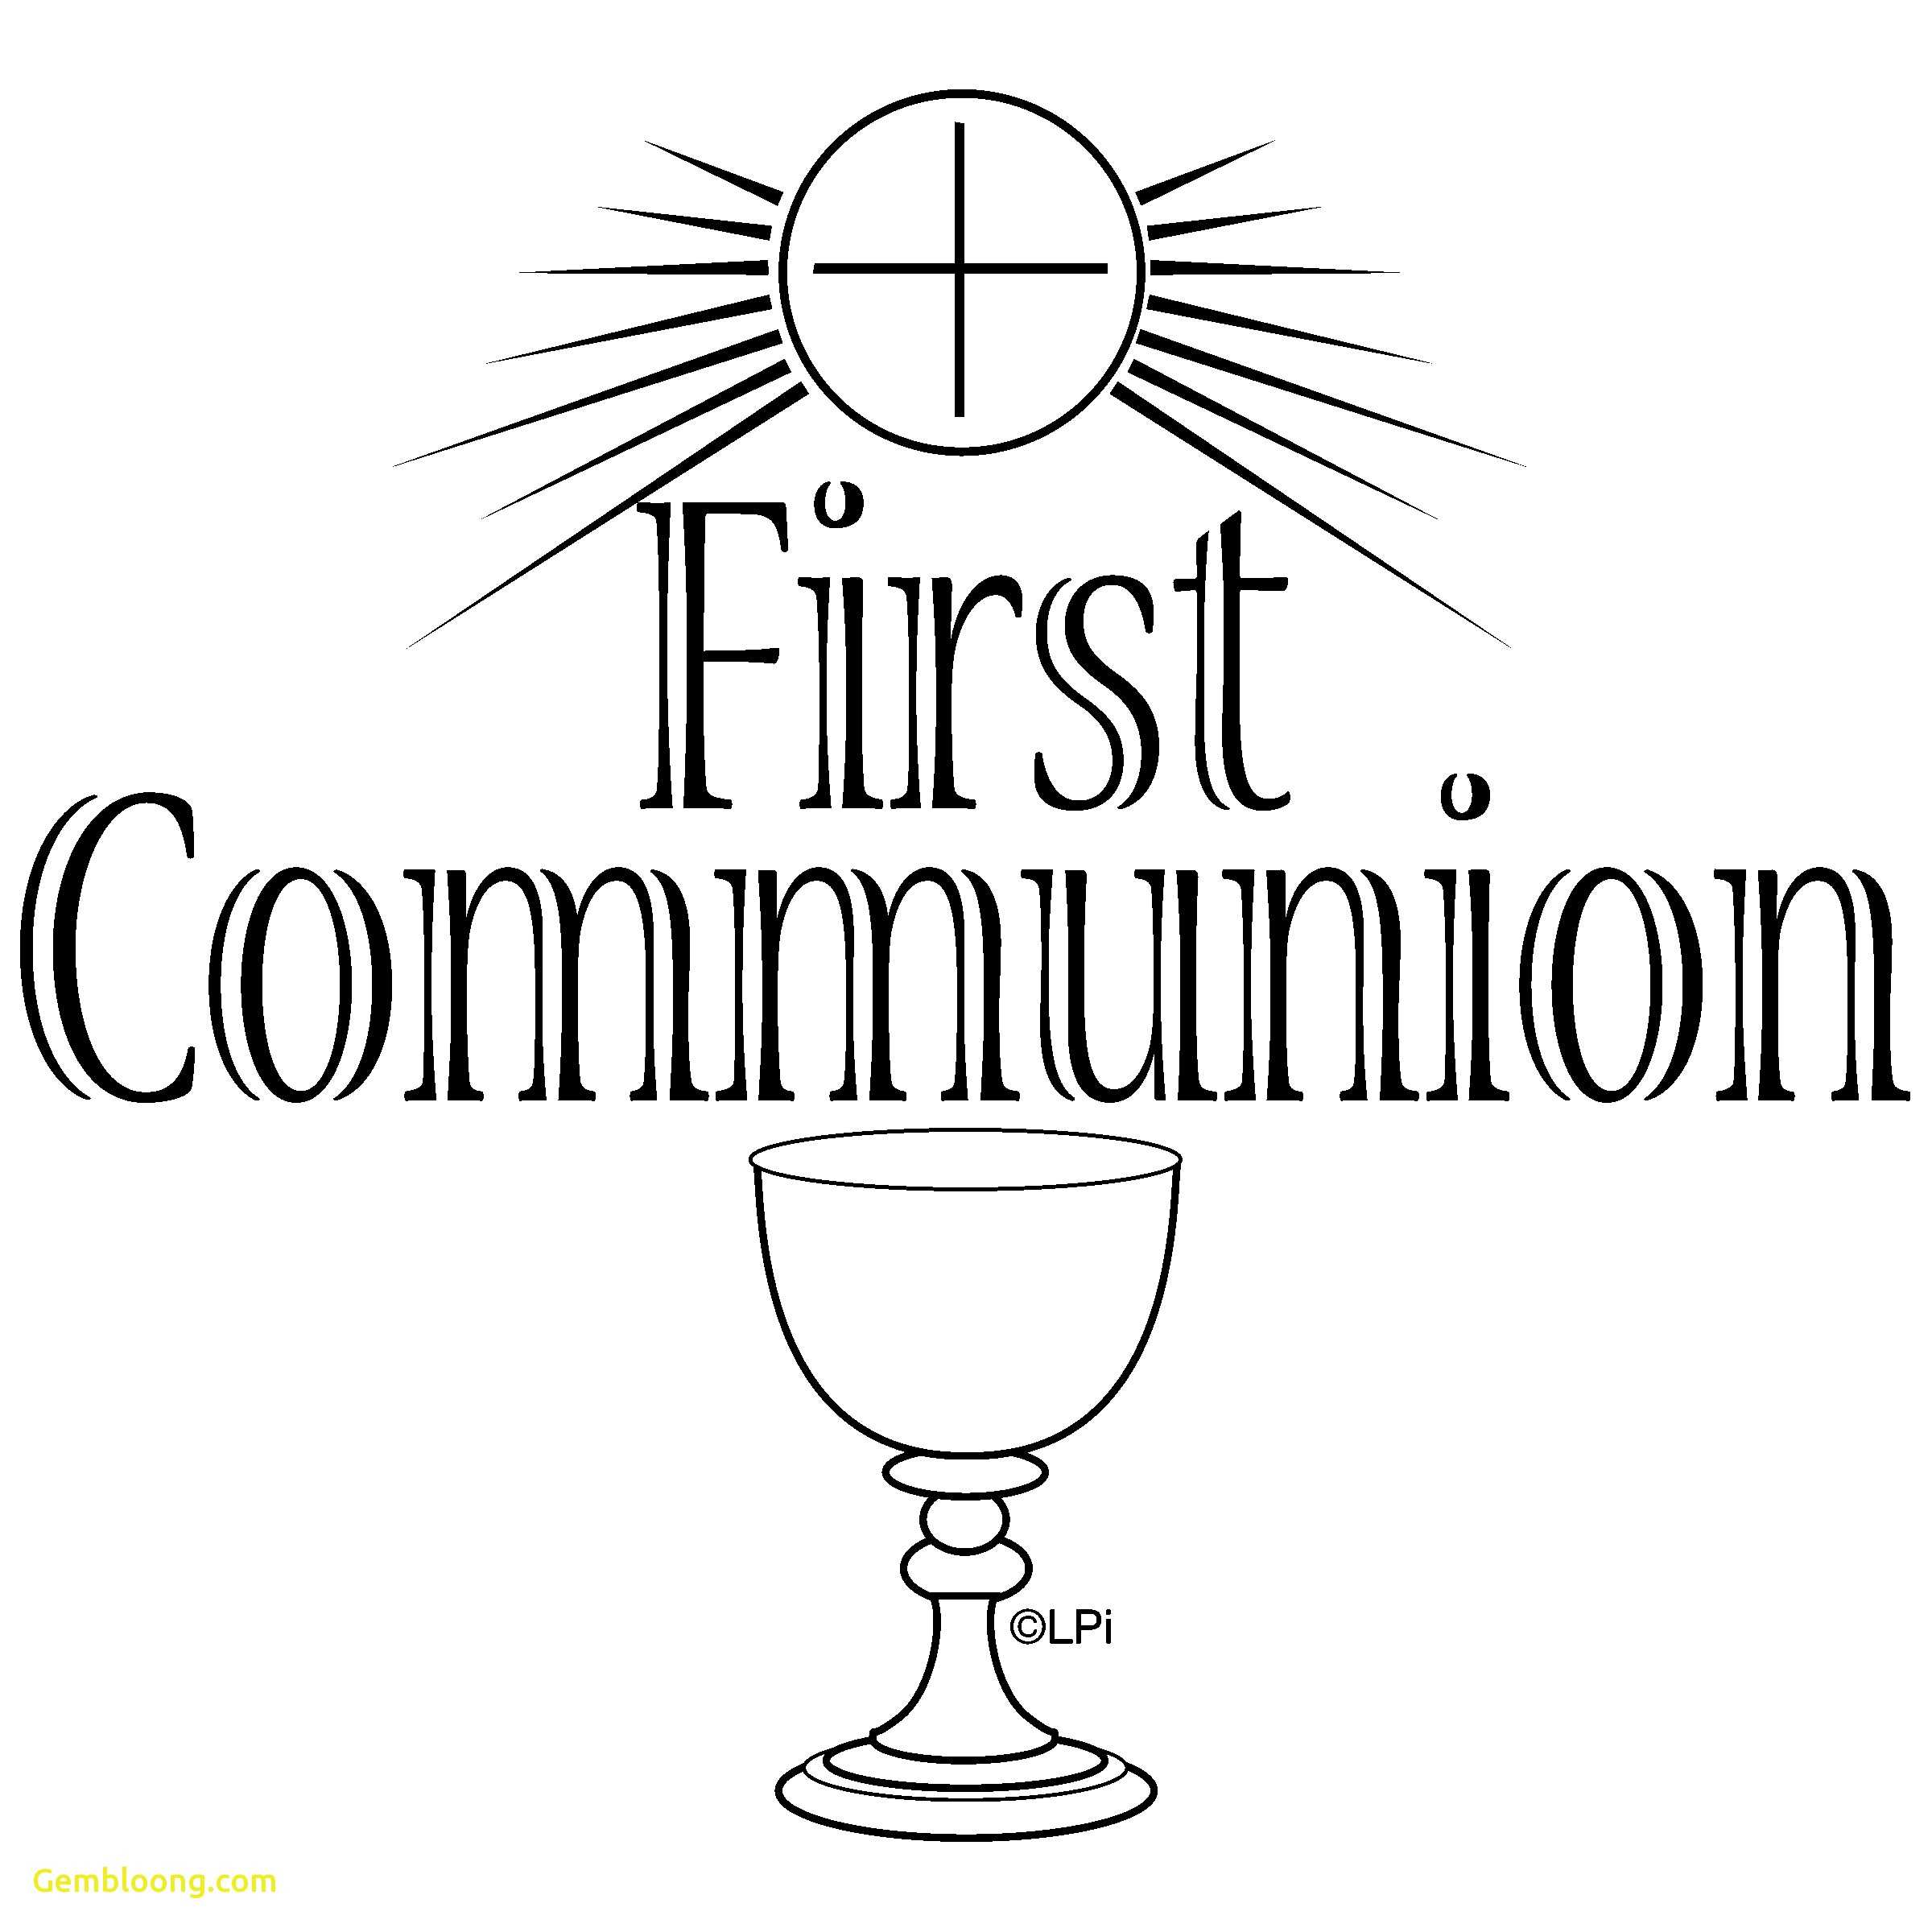 First Communion Worksheet | Printable Worksheets And For First Holy Communion Banner Templates